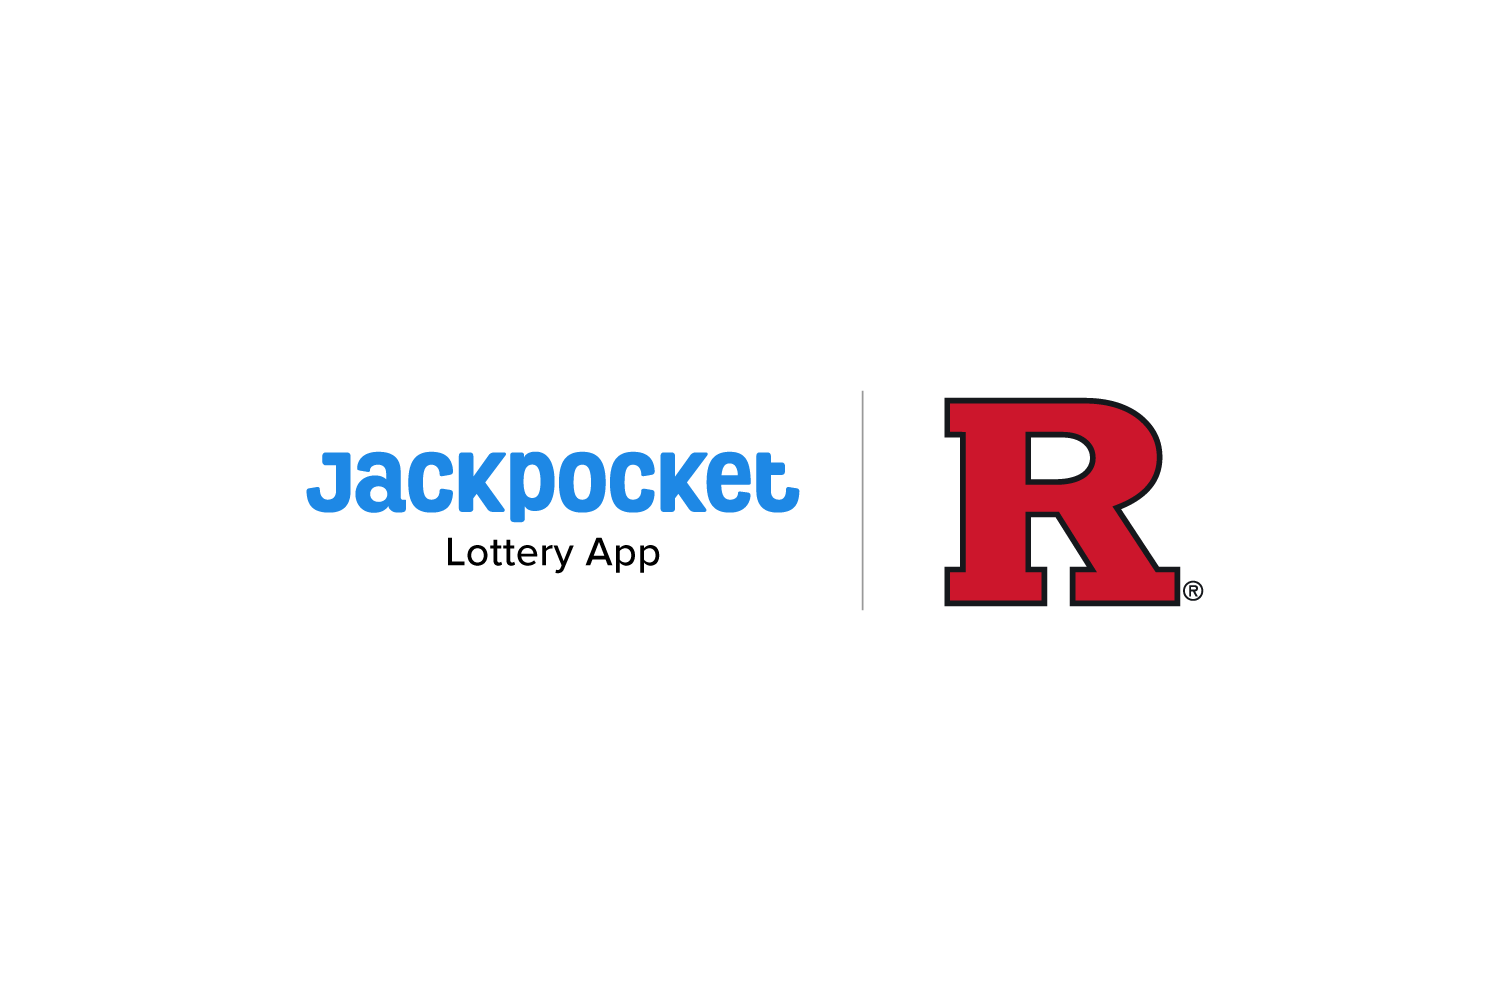 Jackpocket lottery app and Rutgers Athletics